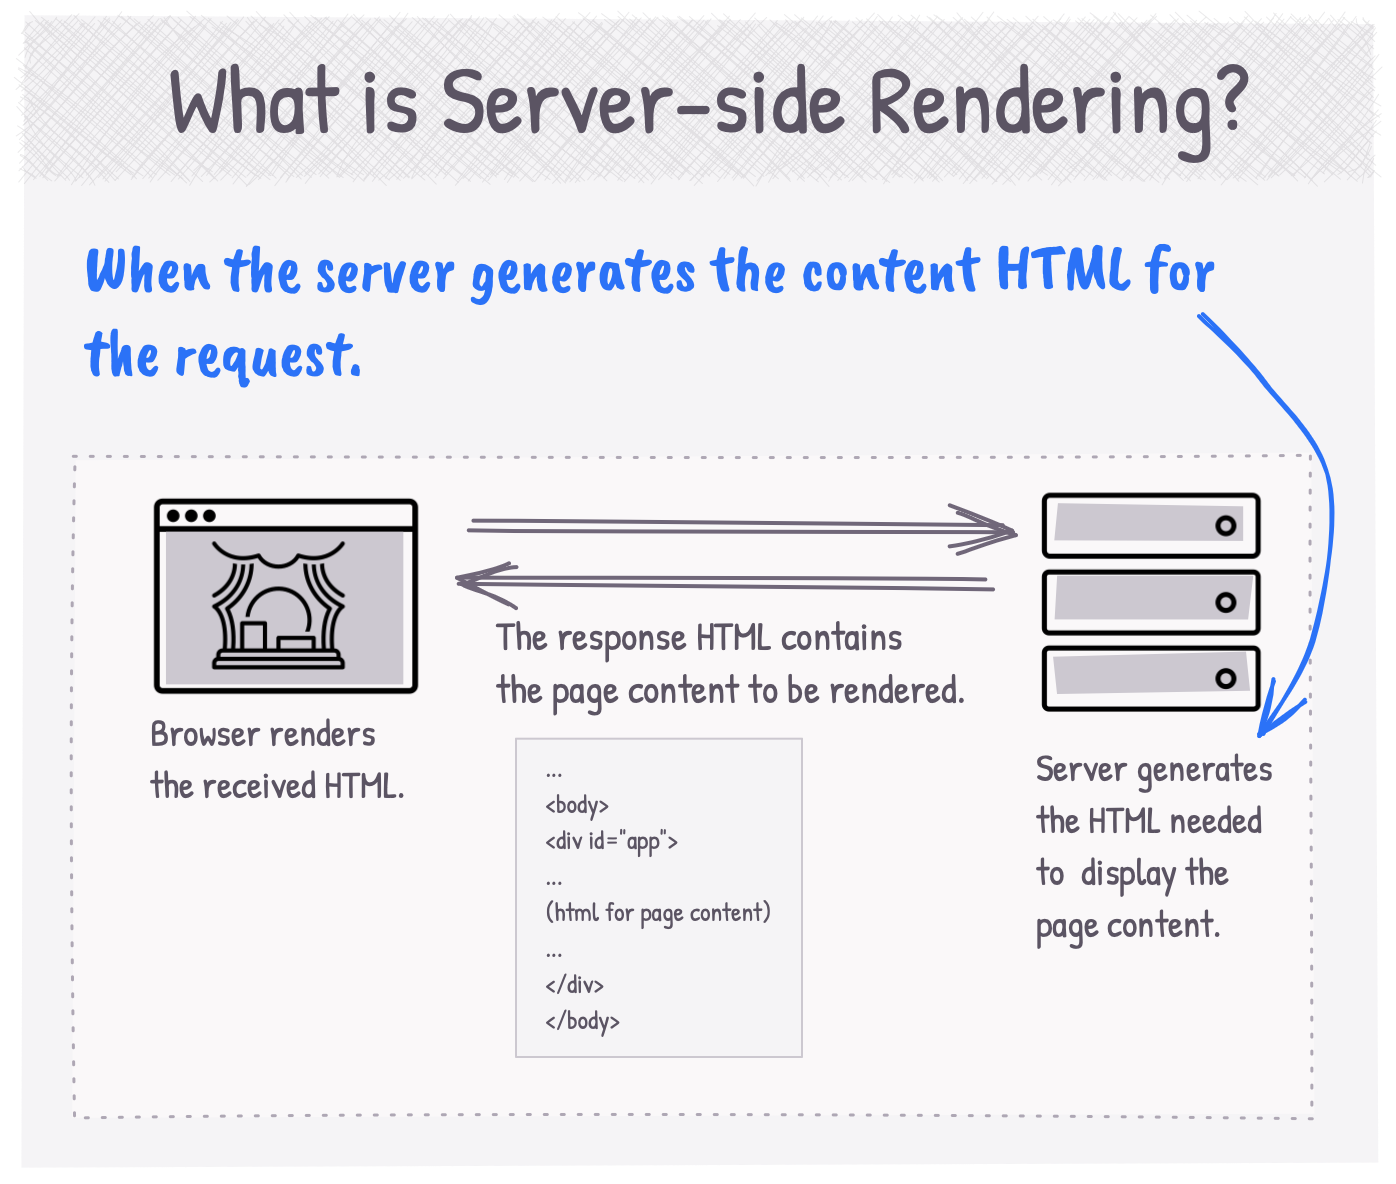 What does Server-side rendering mean?